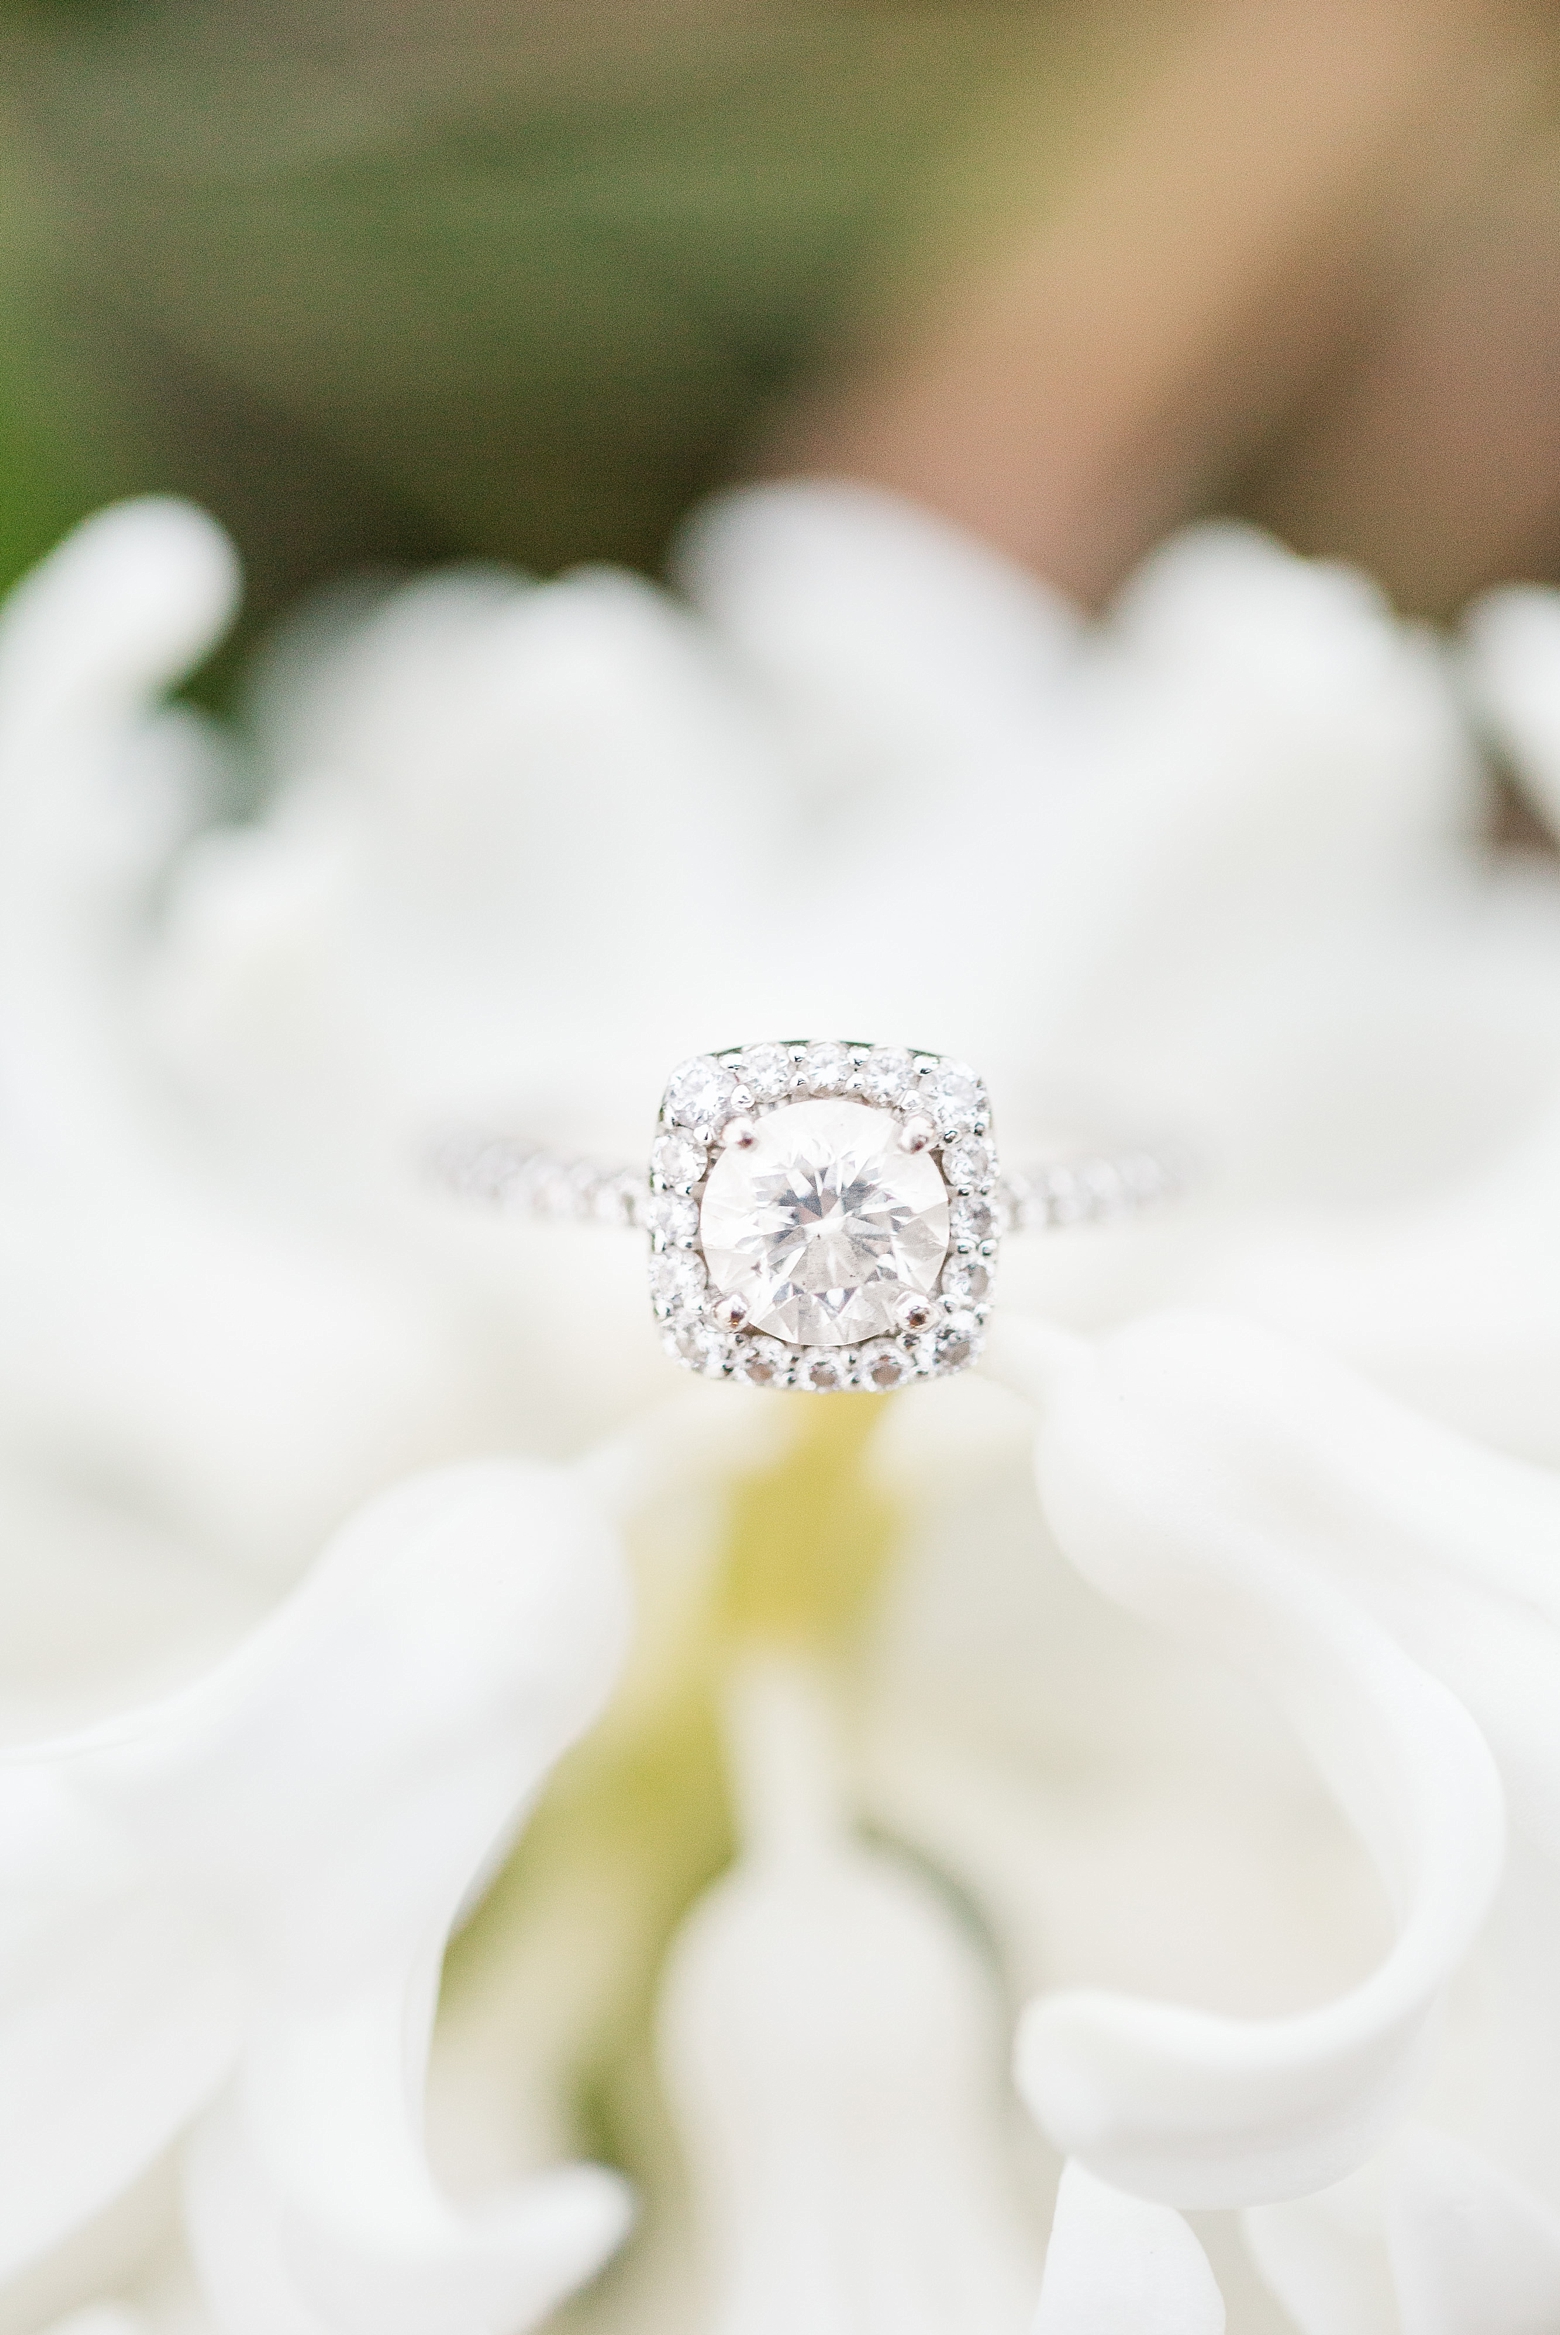 Christopher Newport University Engagement Photography by Angie McPherson Photography